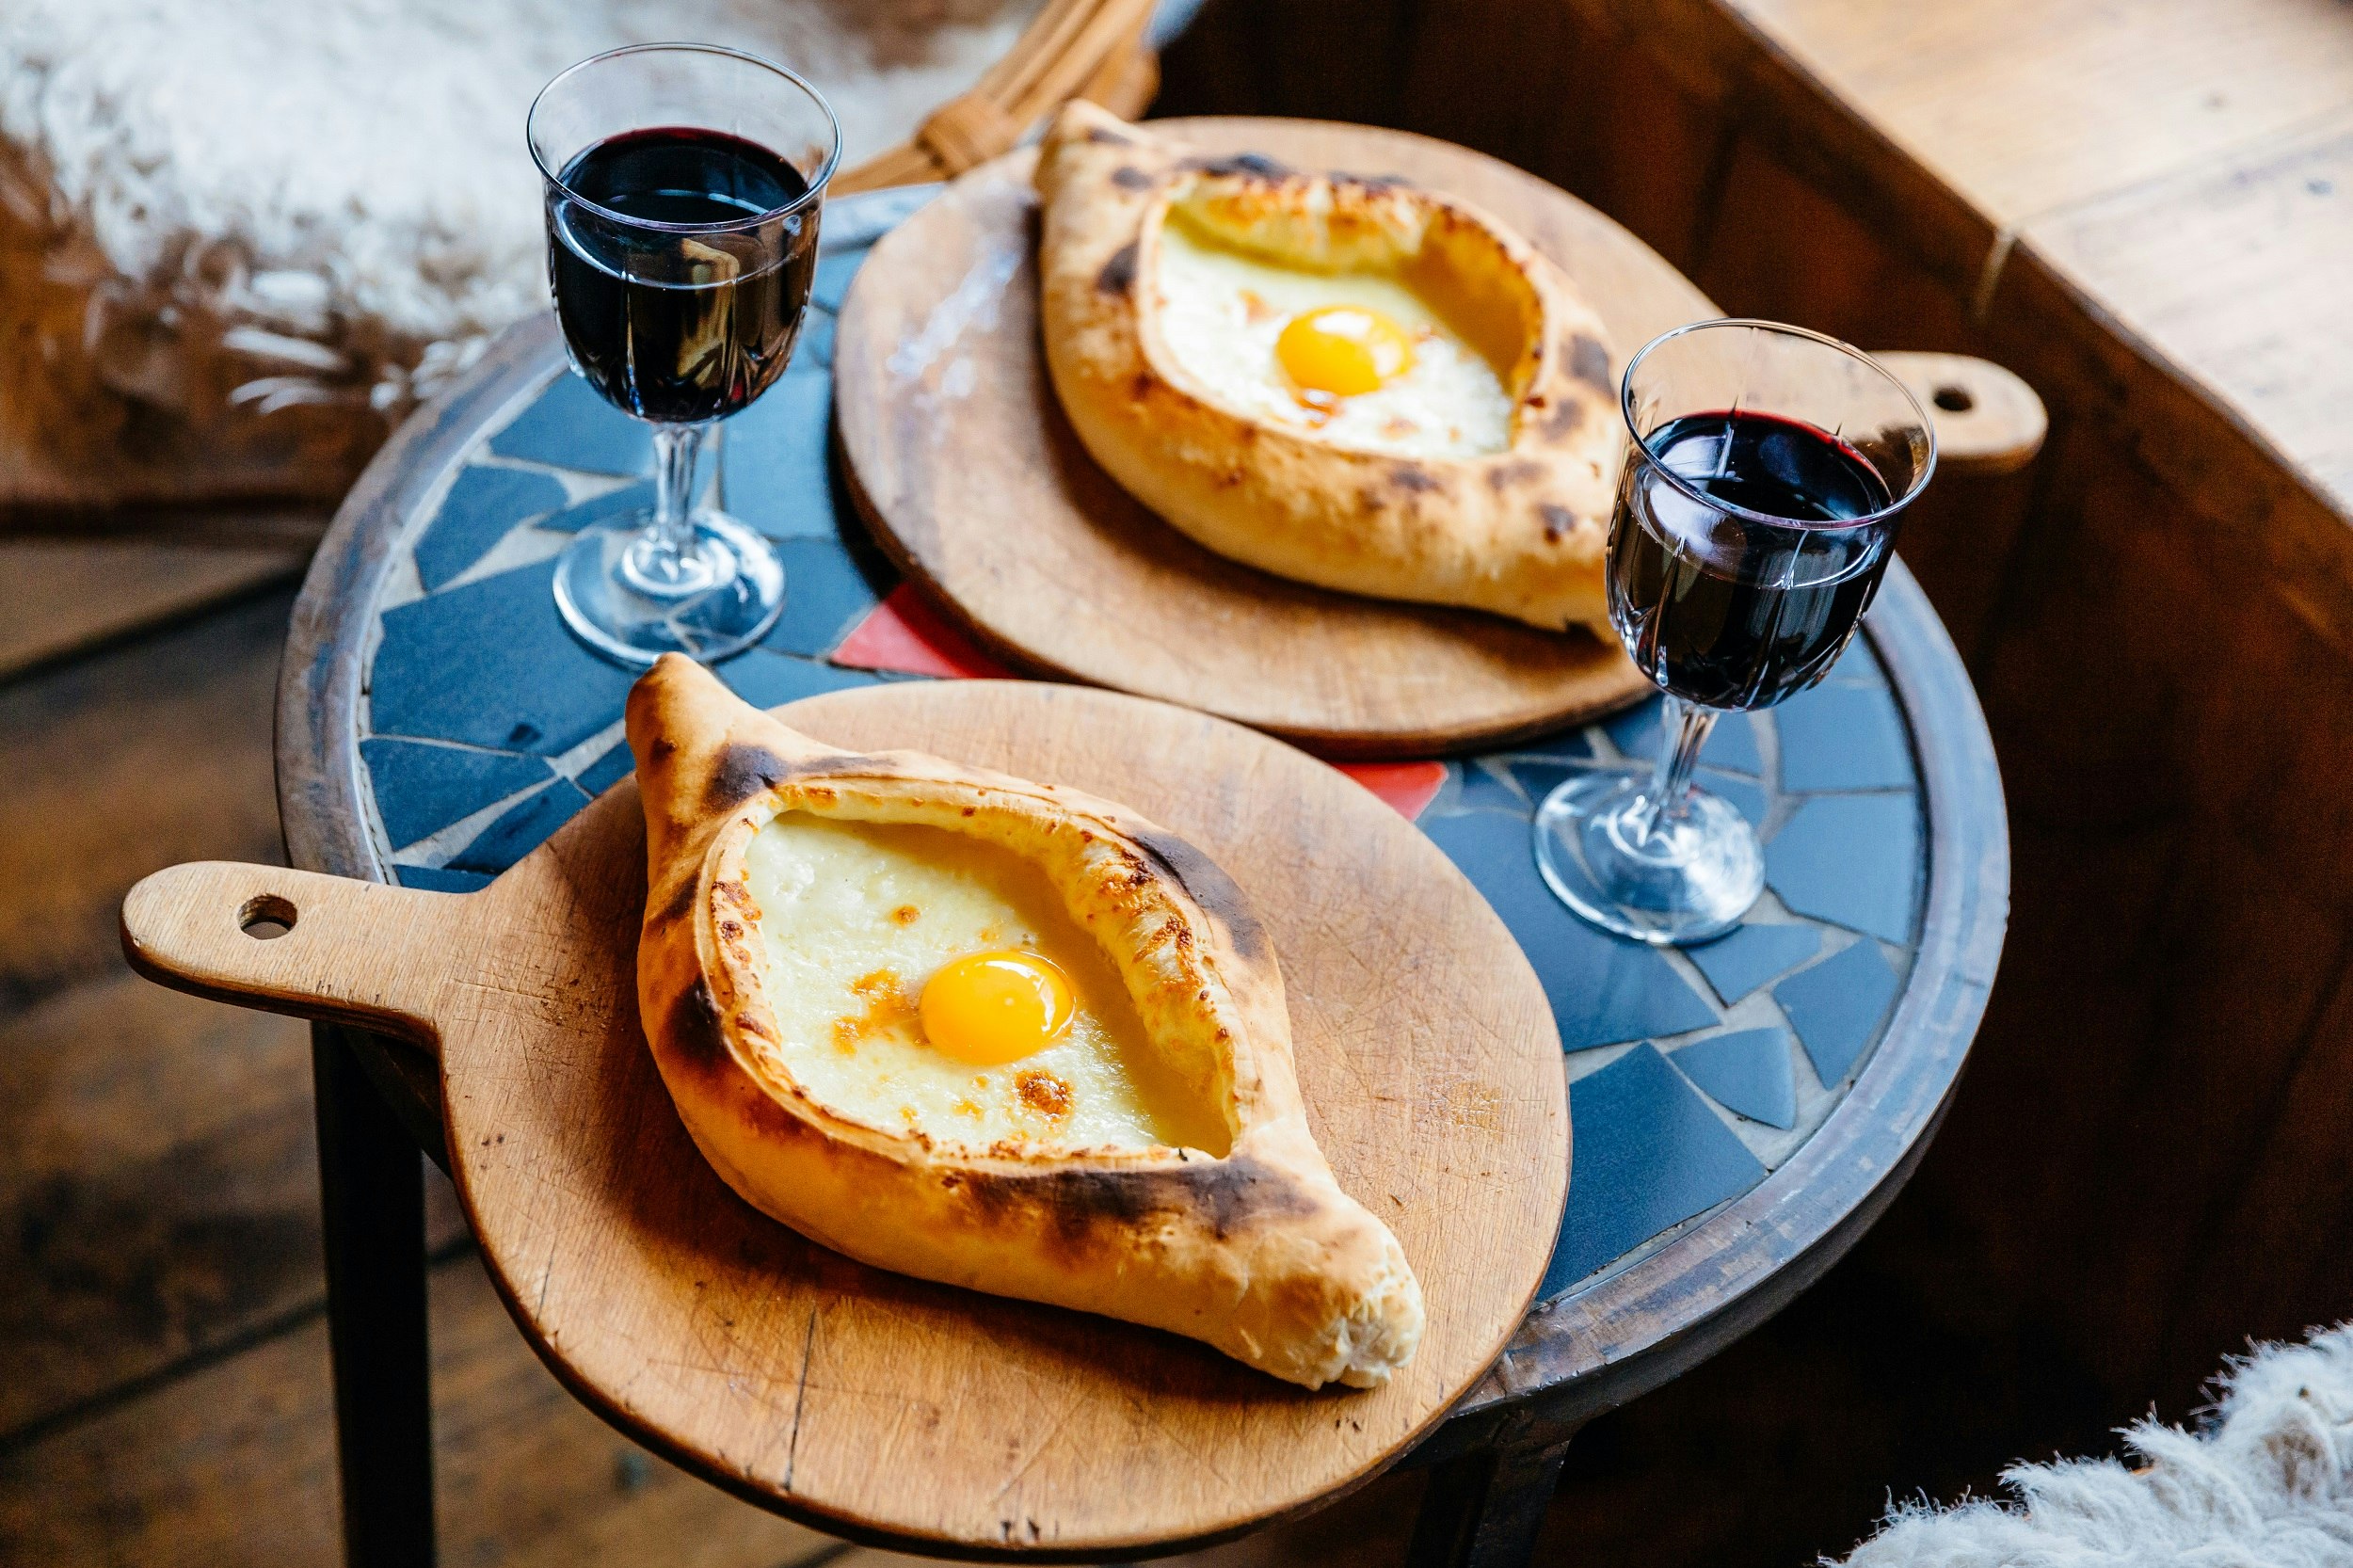 Two dishes of boat-shaped bread filled with cheese and egg, served on wooden boards with glasses of red wine.